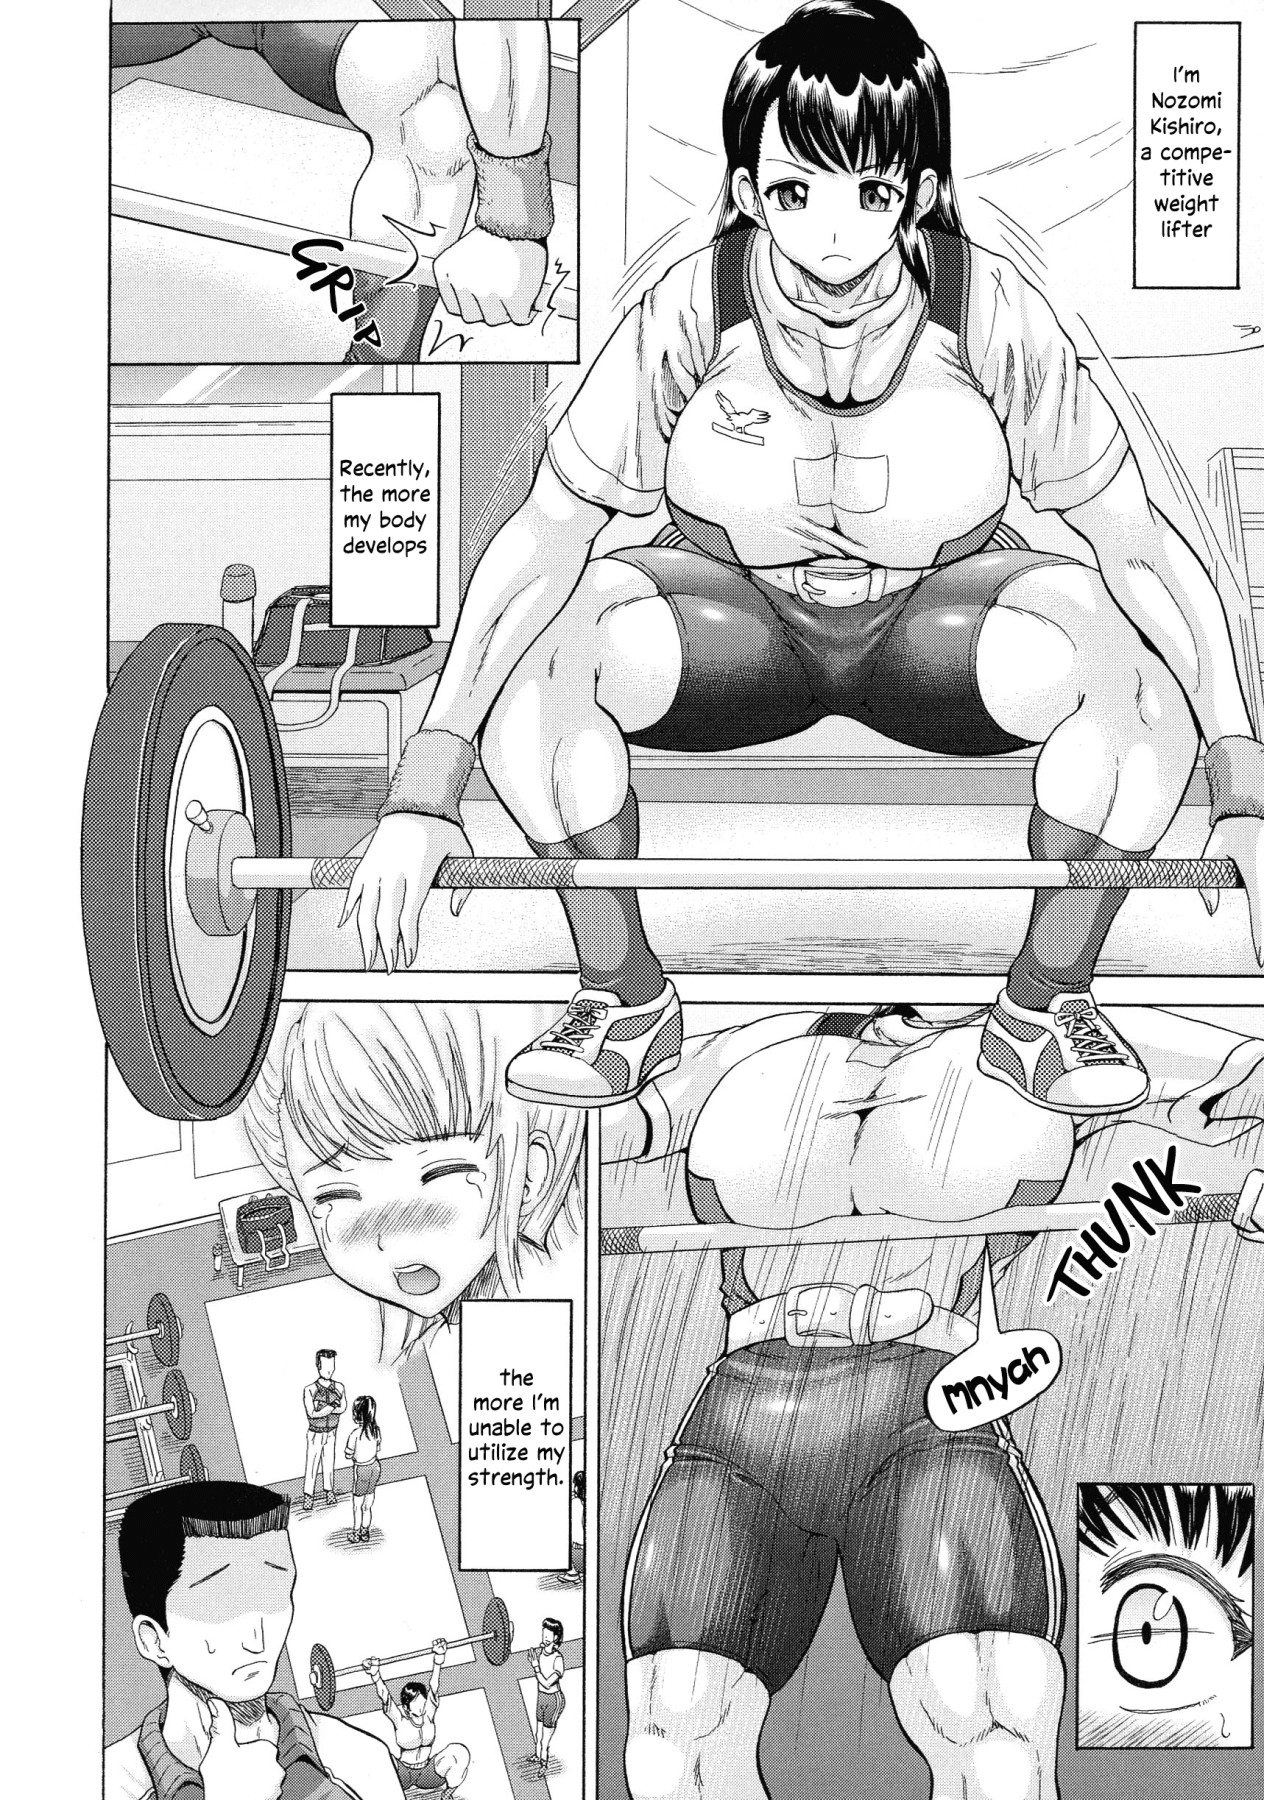 Hentai Manga Comic-SODOMY - Competitive Breast Lifter-Chapter 5-2